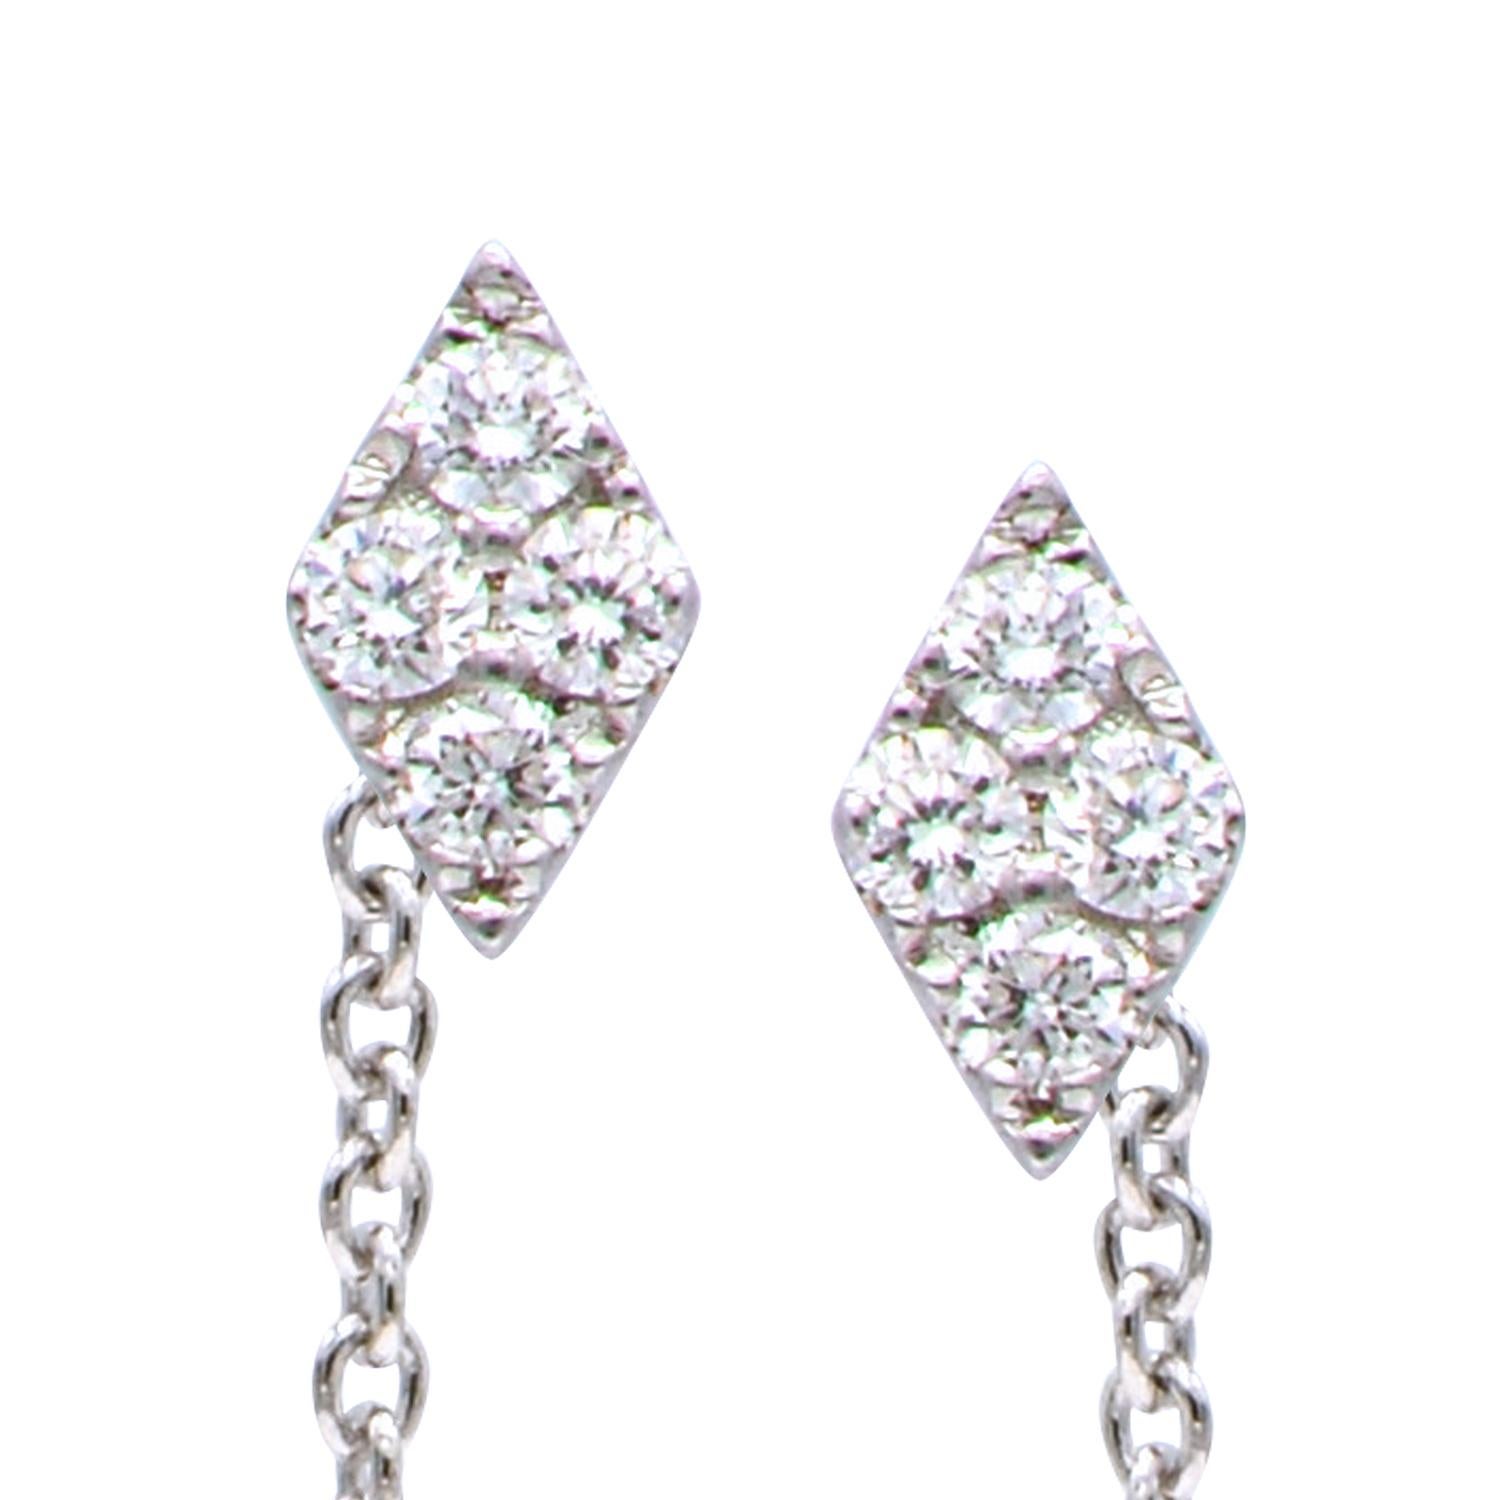 This modern fun earring is a simple way to vamp up your style. A diamond shaped stud made up of 8 VS2, G color diamonds is enhanced by a chain that slides through the ear and hangs in the back with a white gold post at the end. This dangling stud